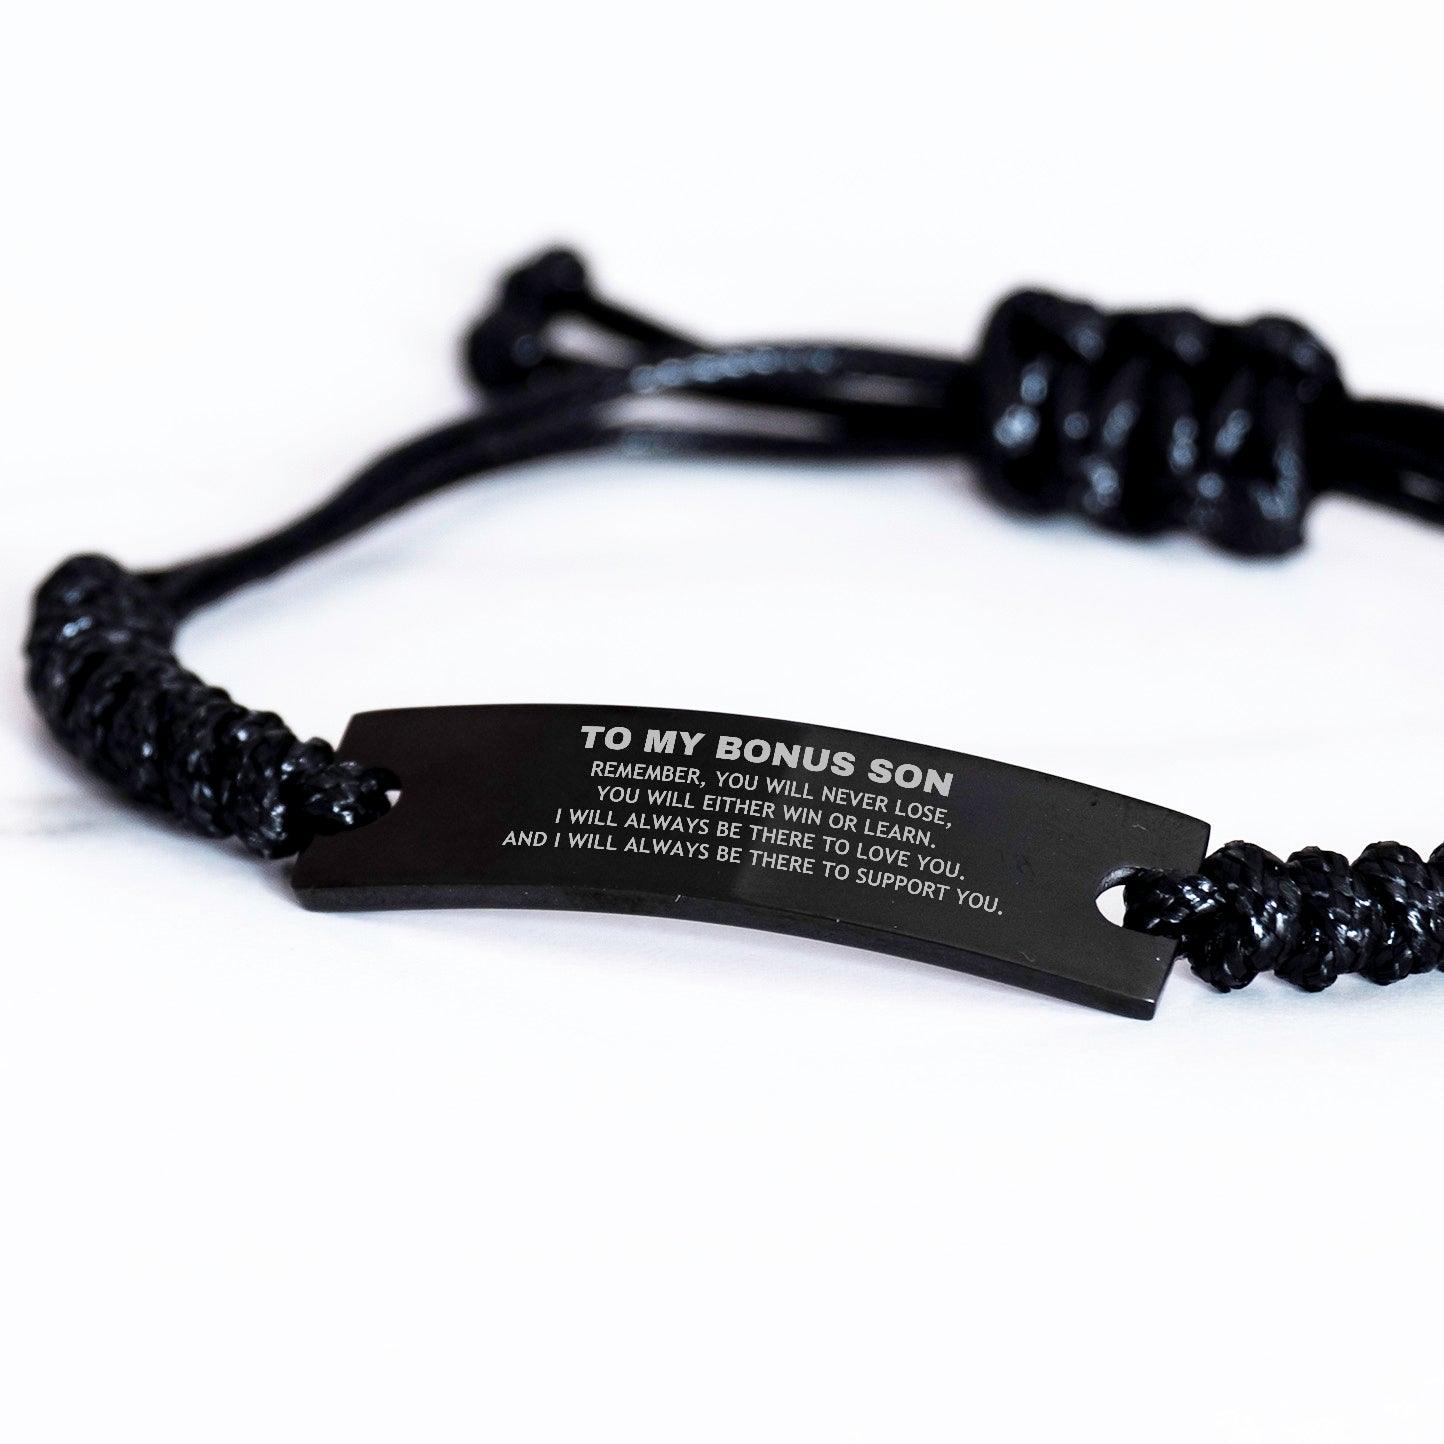 Bonus Son Gifts, To My Bonus Son Remember, you will never lose. You will either WIN or LEARN, Keepsake Black Rope Bracelet For Bonus Son Engraved, Birthday Christmas Gifts Ideas For Bonus Son X-mas Gifts - Mallard Moon Gift Shop